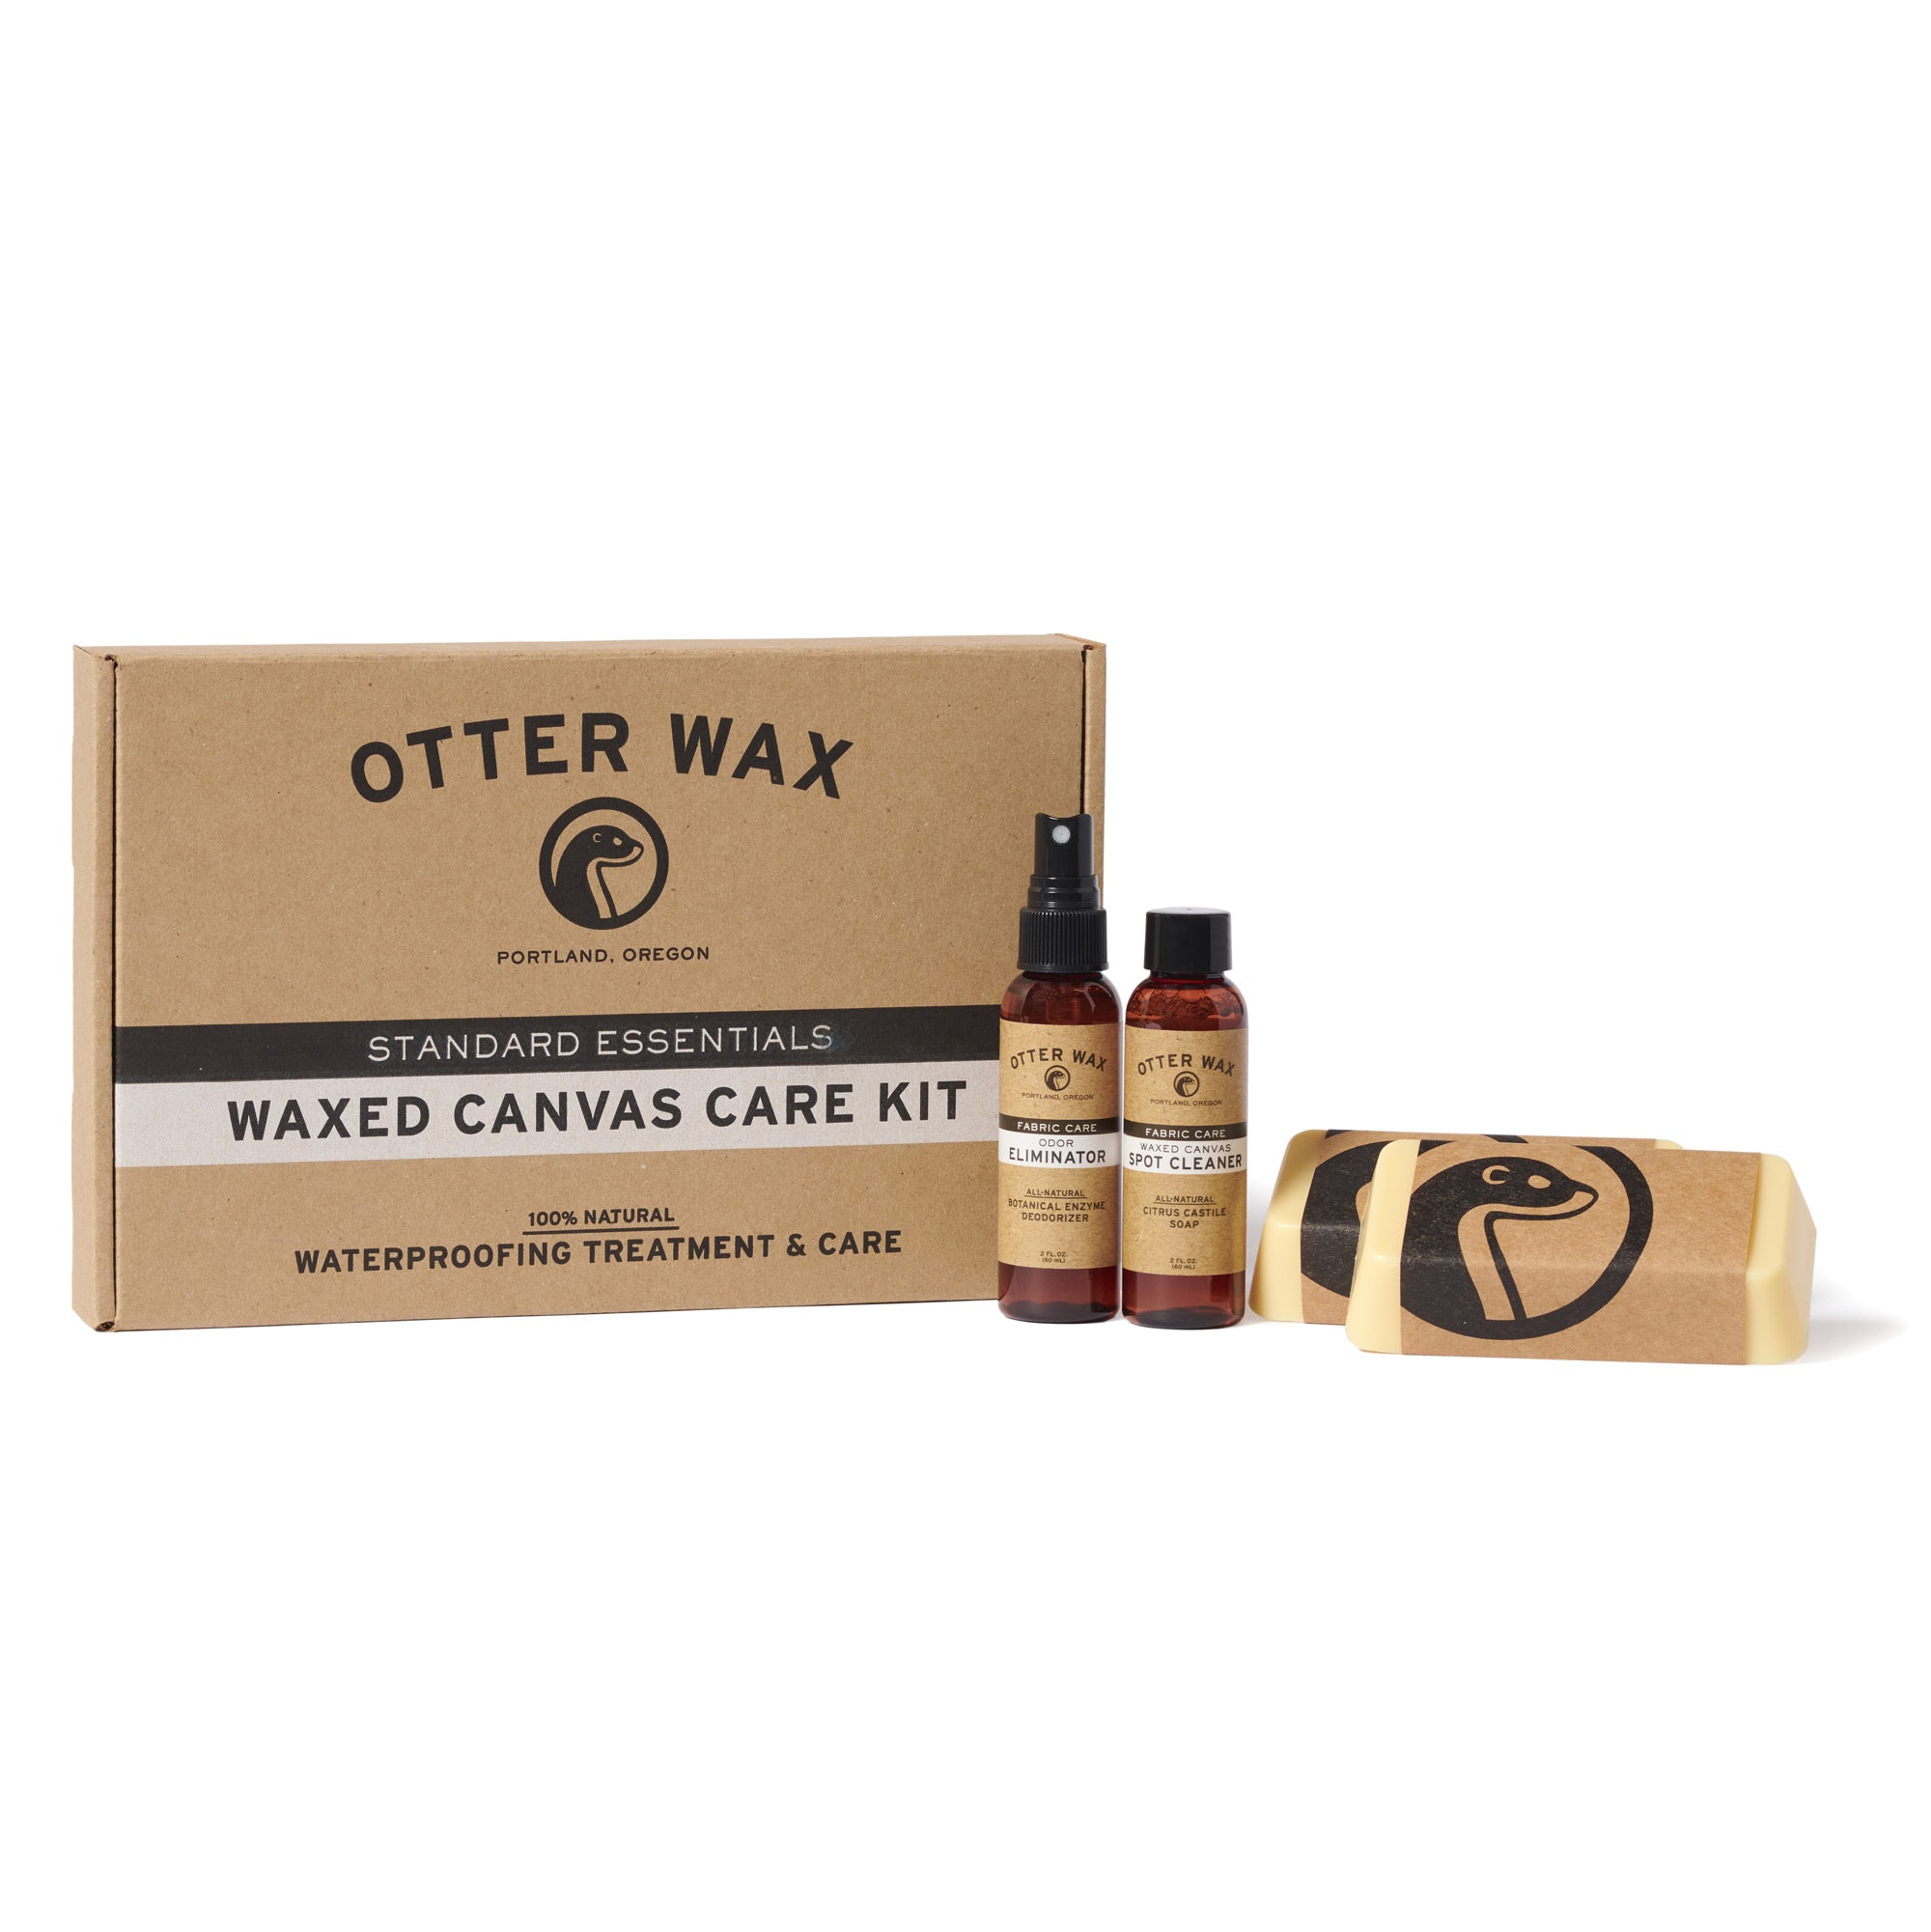 Otter Wax Waxed Canvas Spot Cleaner